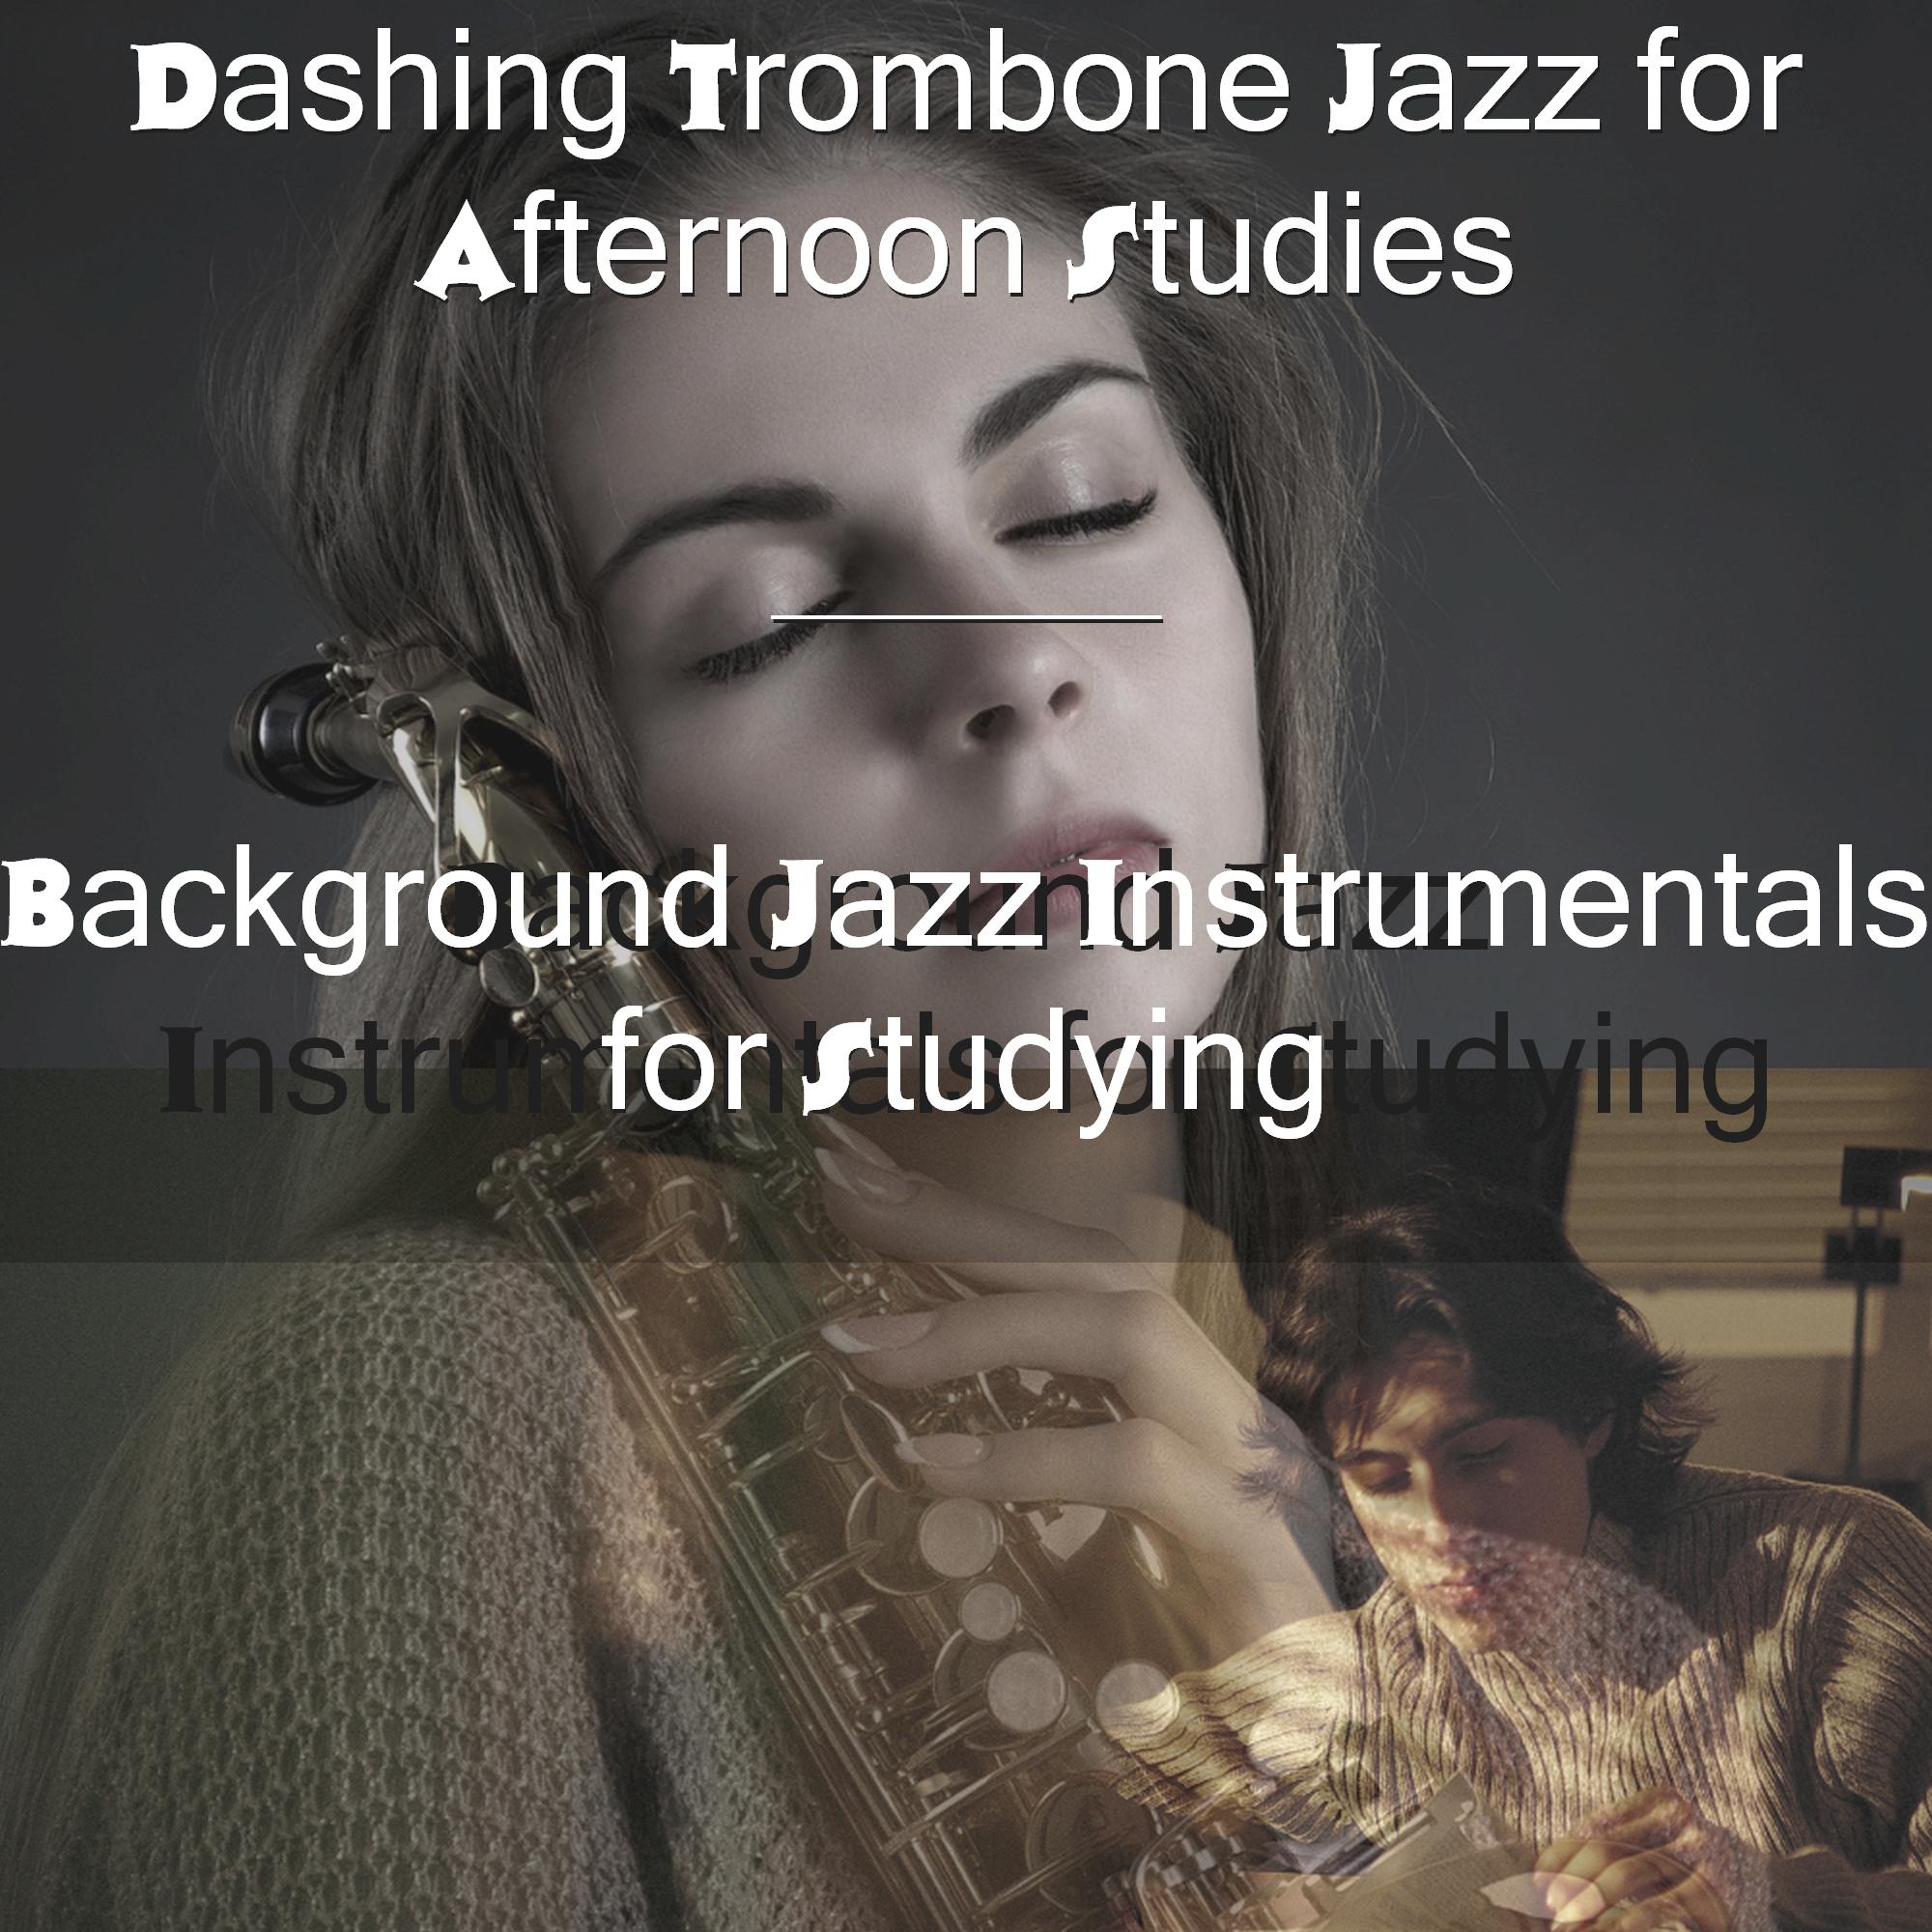 Easy Quintet Jazz for Studying in the Afternoon